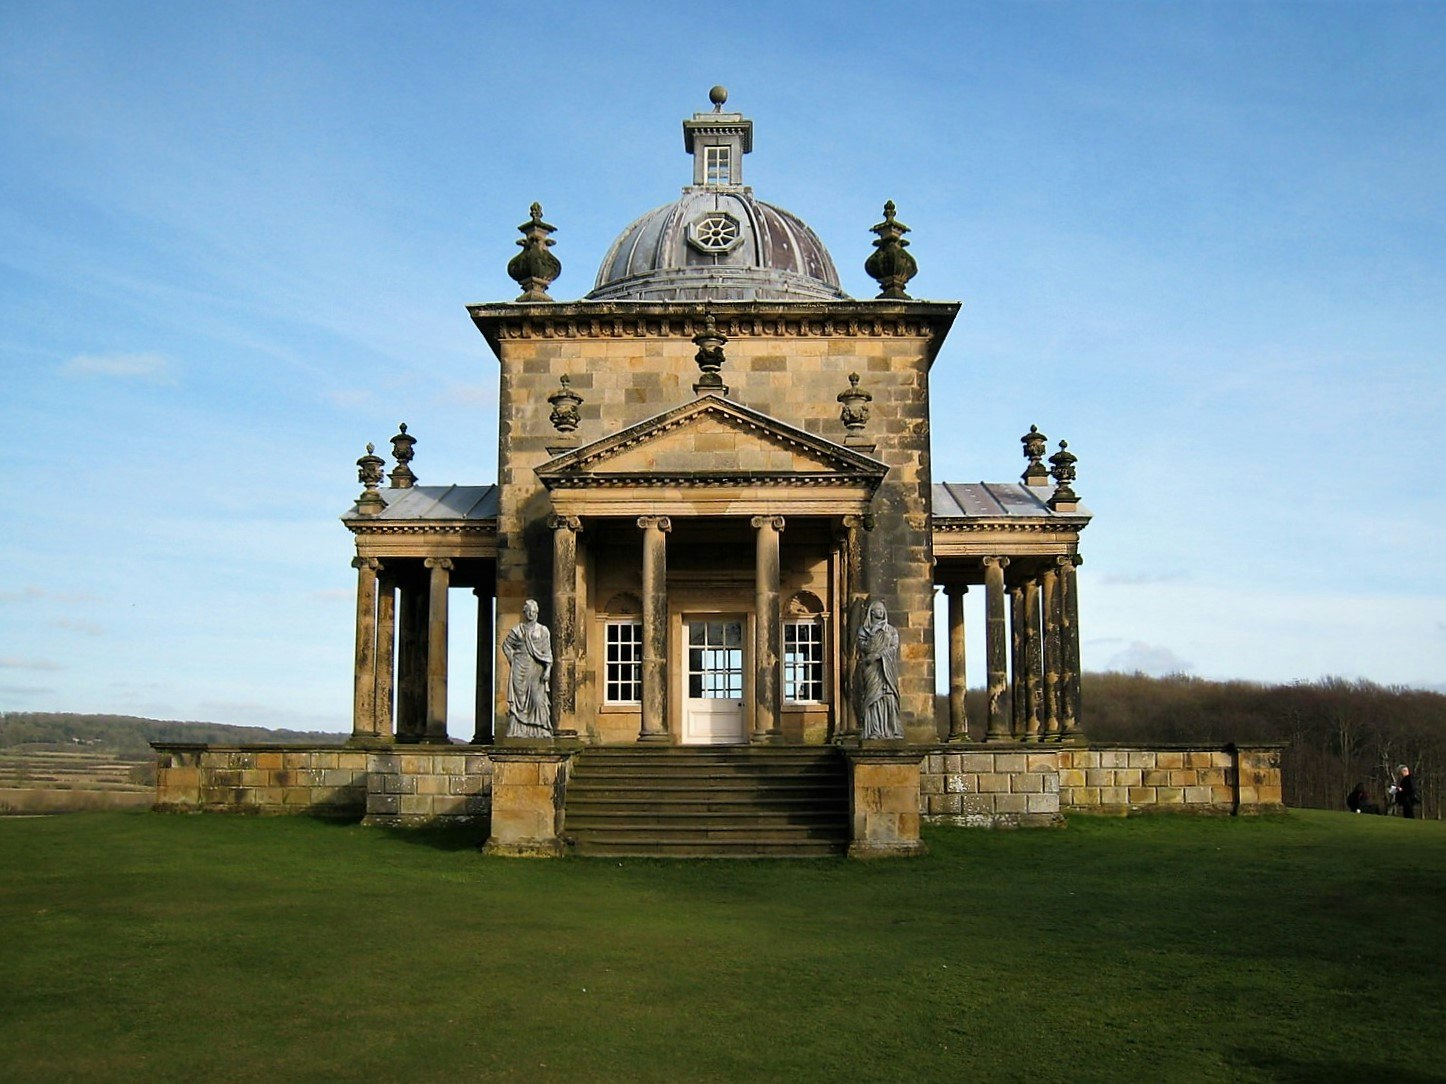 The Temple of the Four Winds at Castle Howard © melissa matsu / Budget Travel